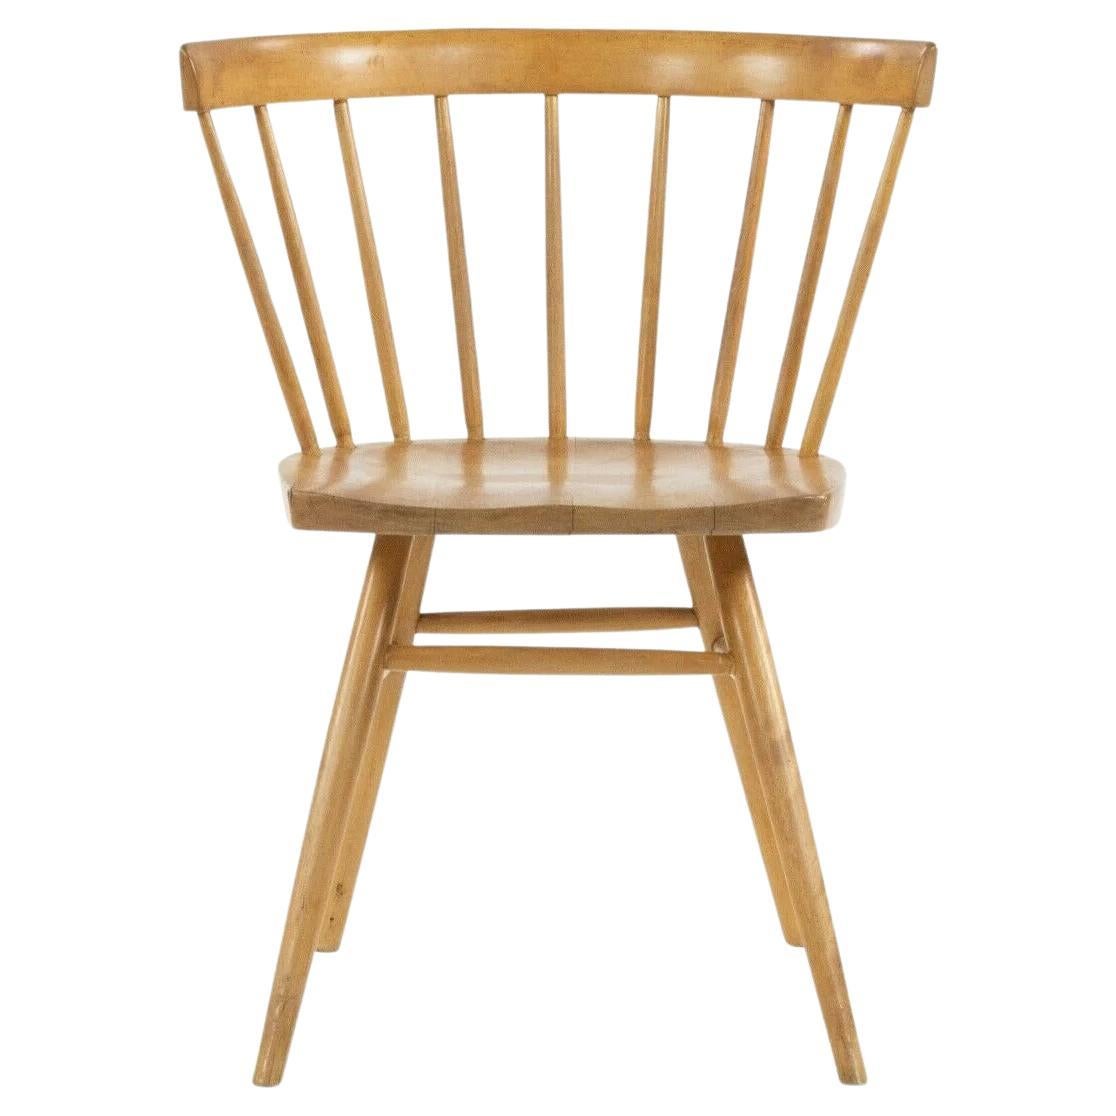 1947 George Nakashima for Knoll N19 Straight Chair in Natural Birch